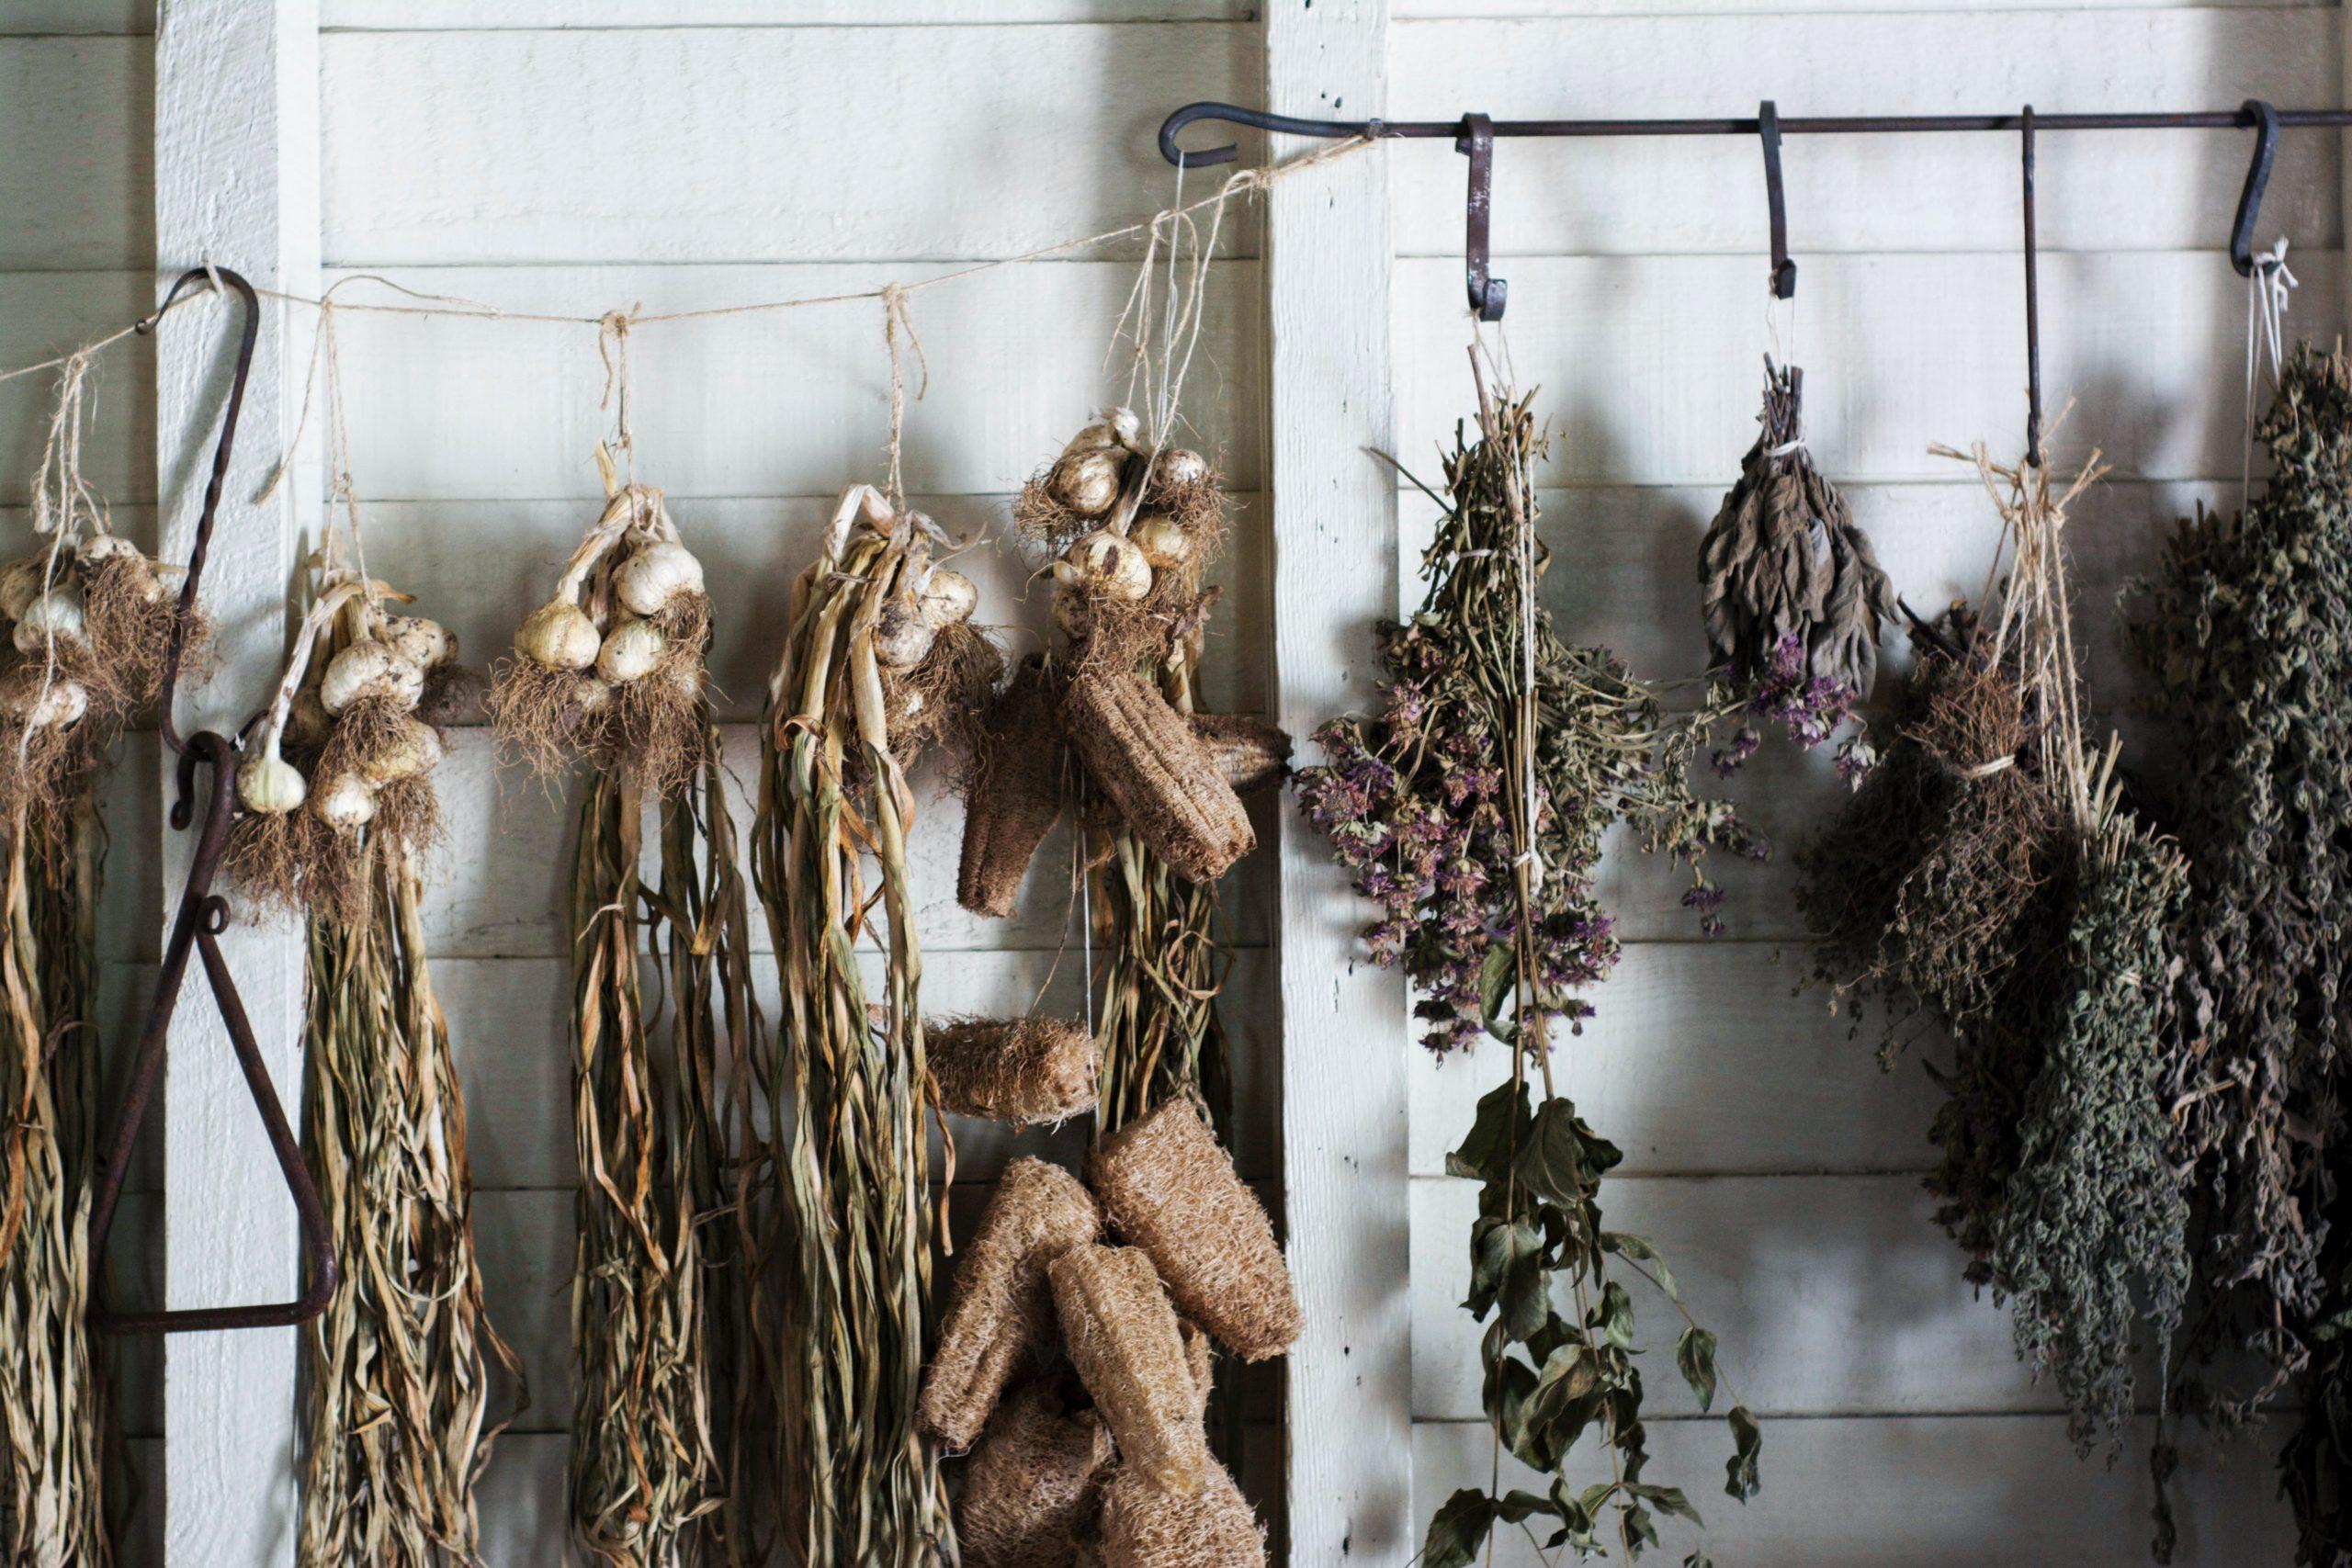 dried herbs hanging from strings against a white wall